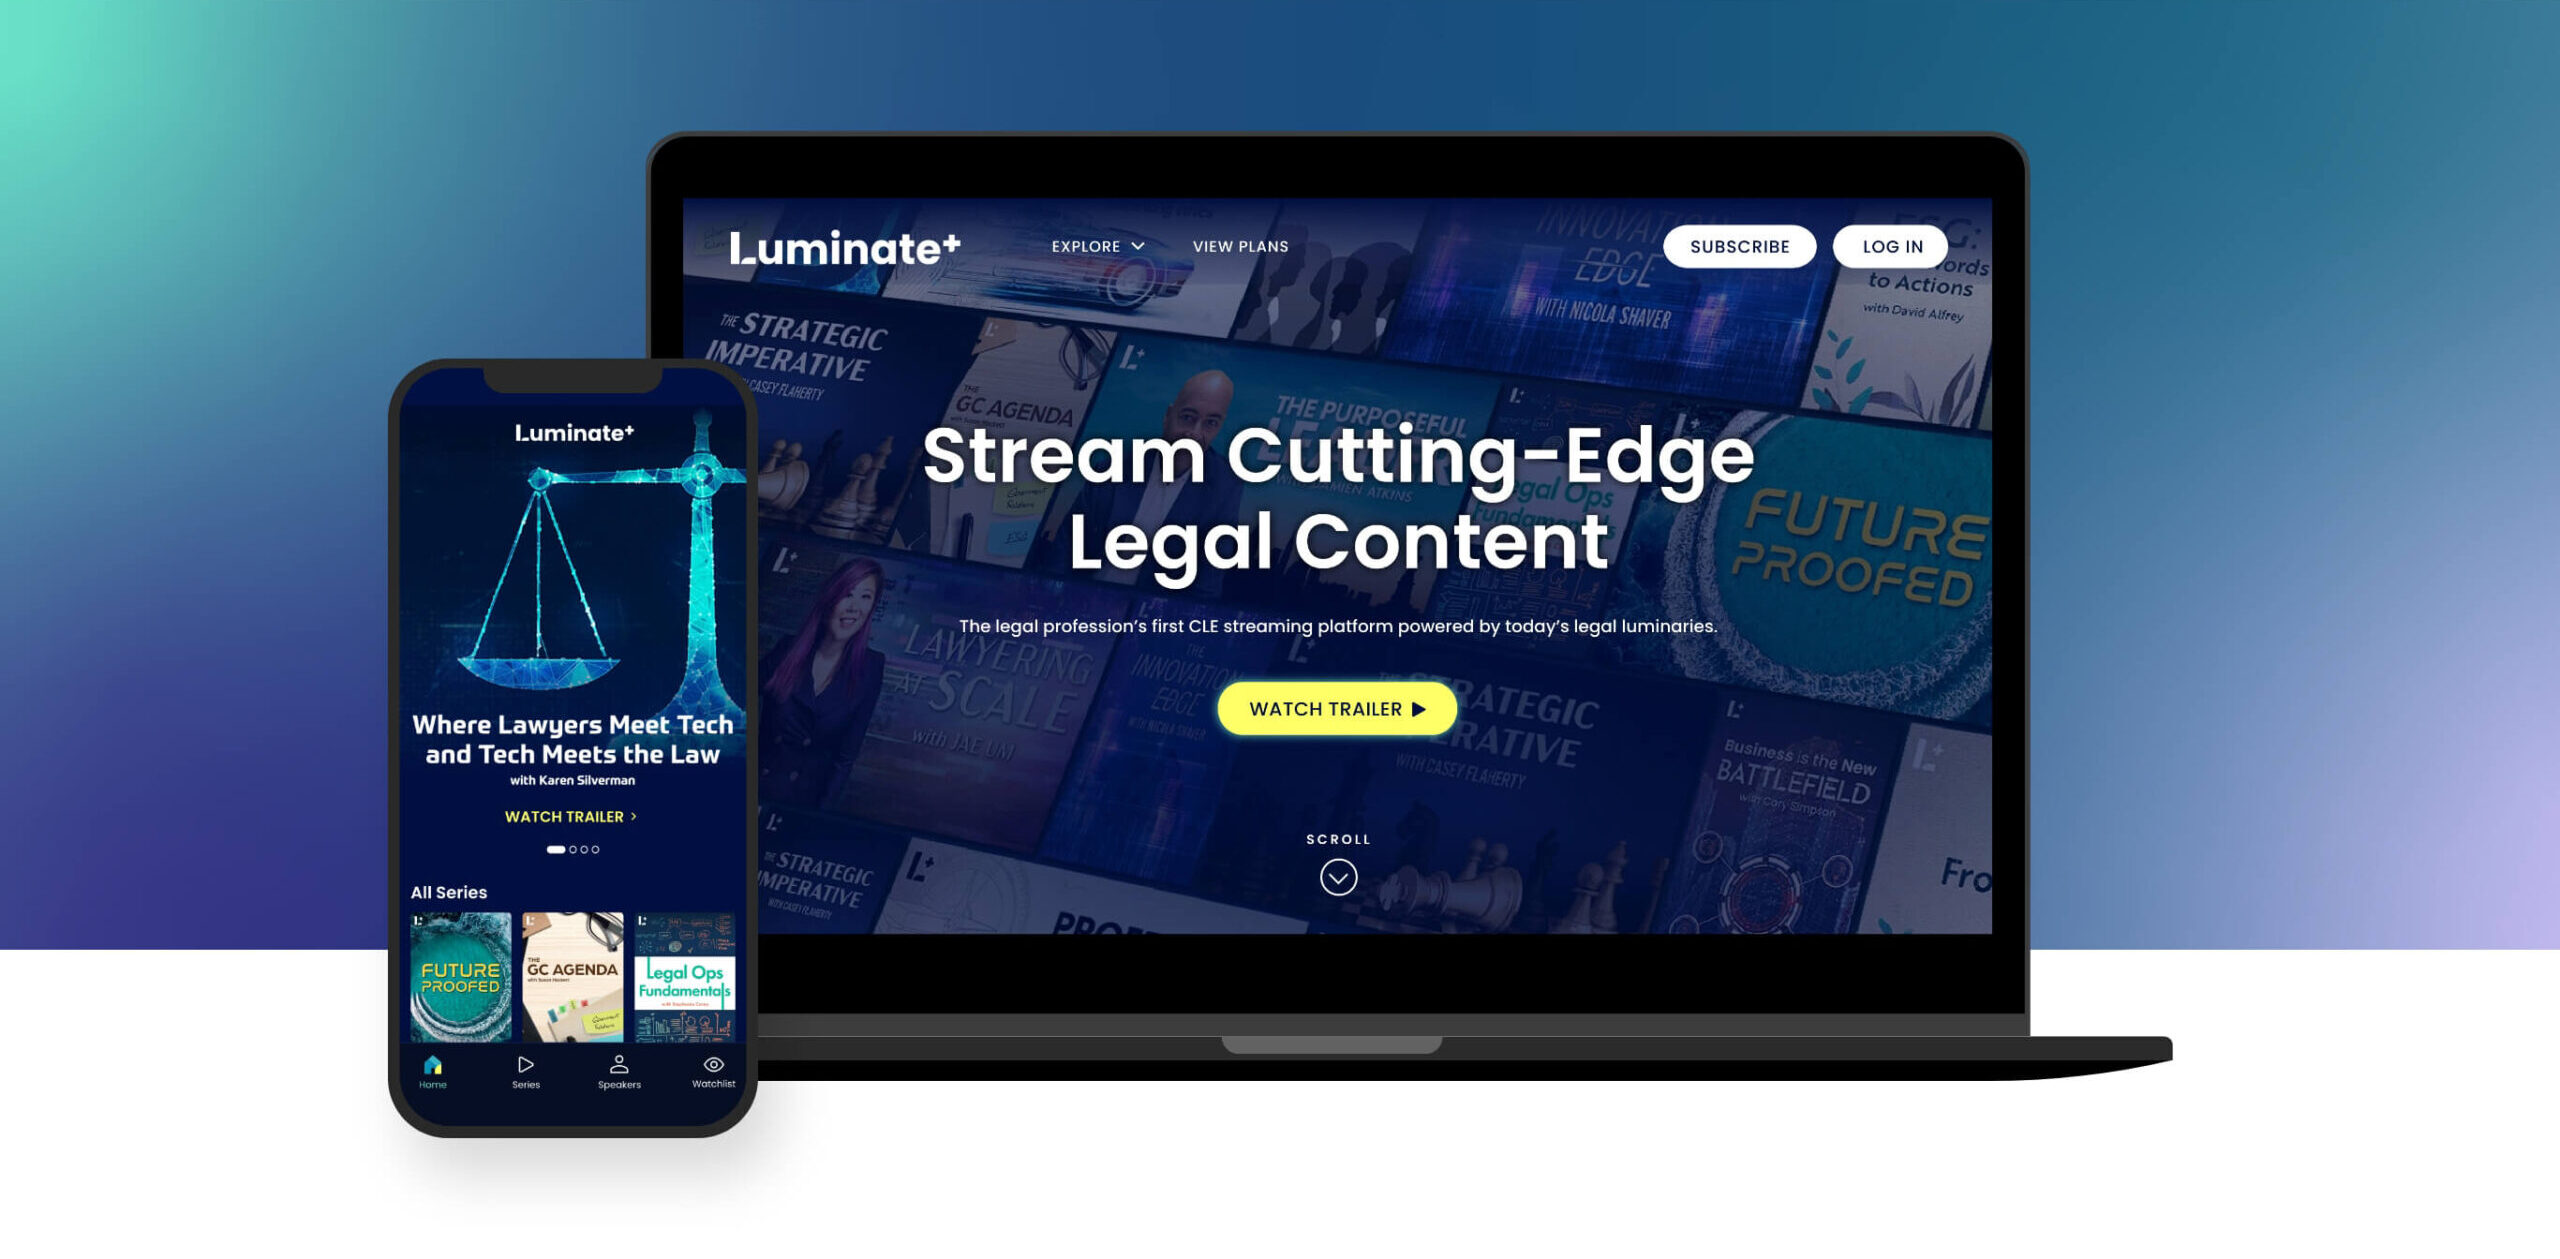 A STREAMING PLATFORM FOR THE LEGAL PROFESSION